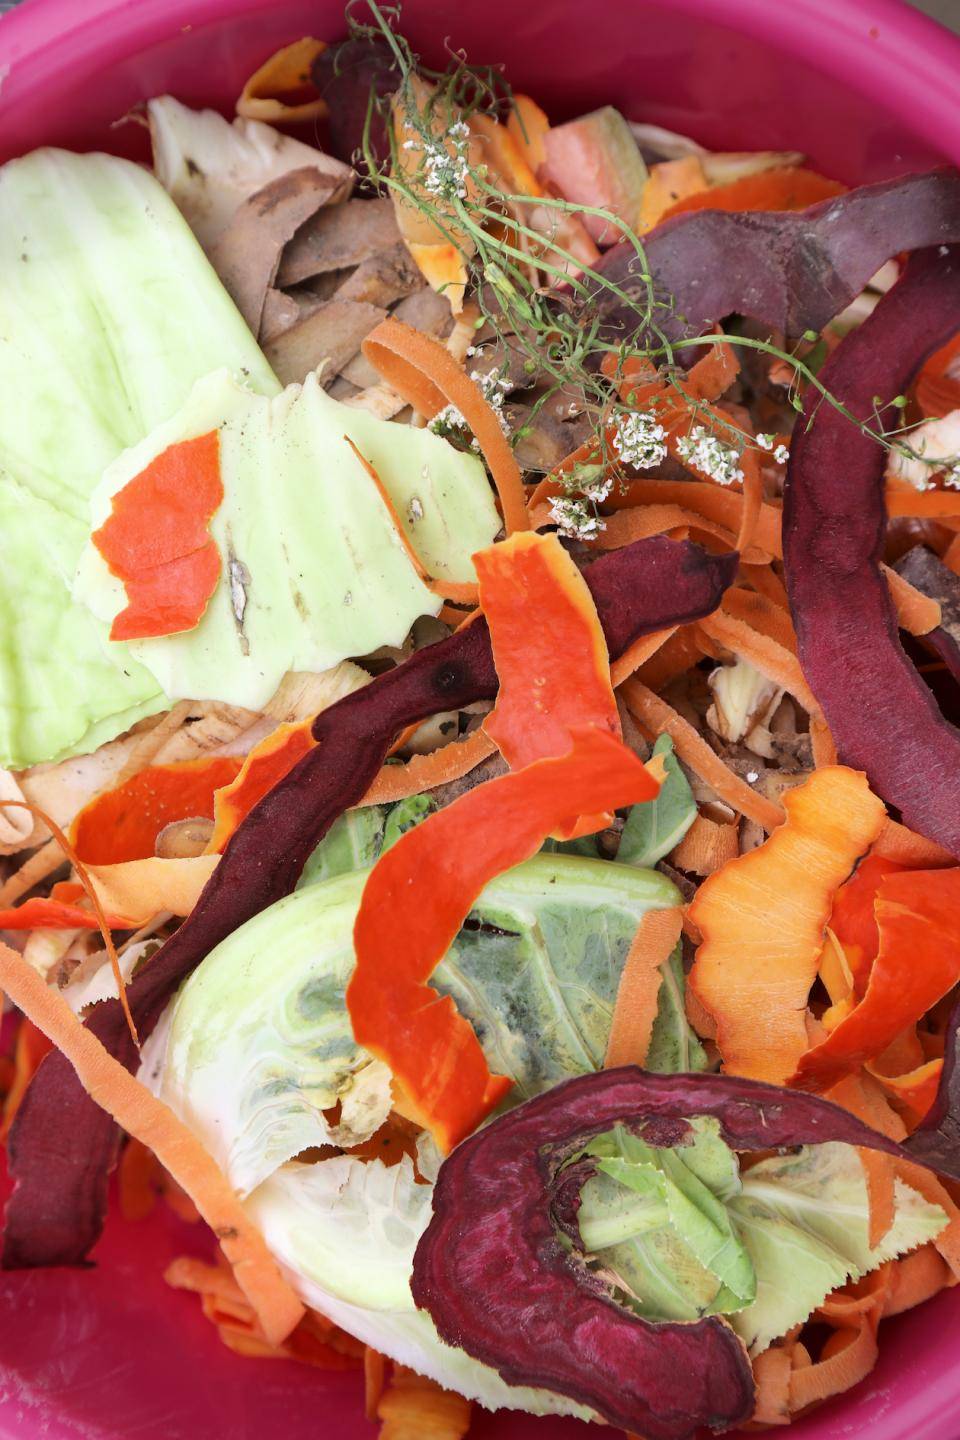 close-up shot of a pile of vegetable peels